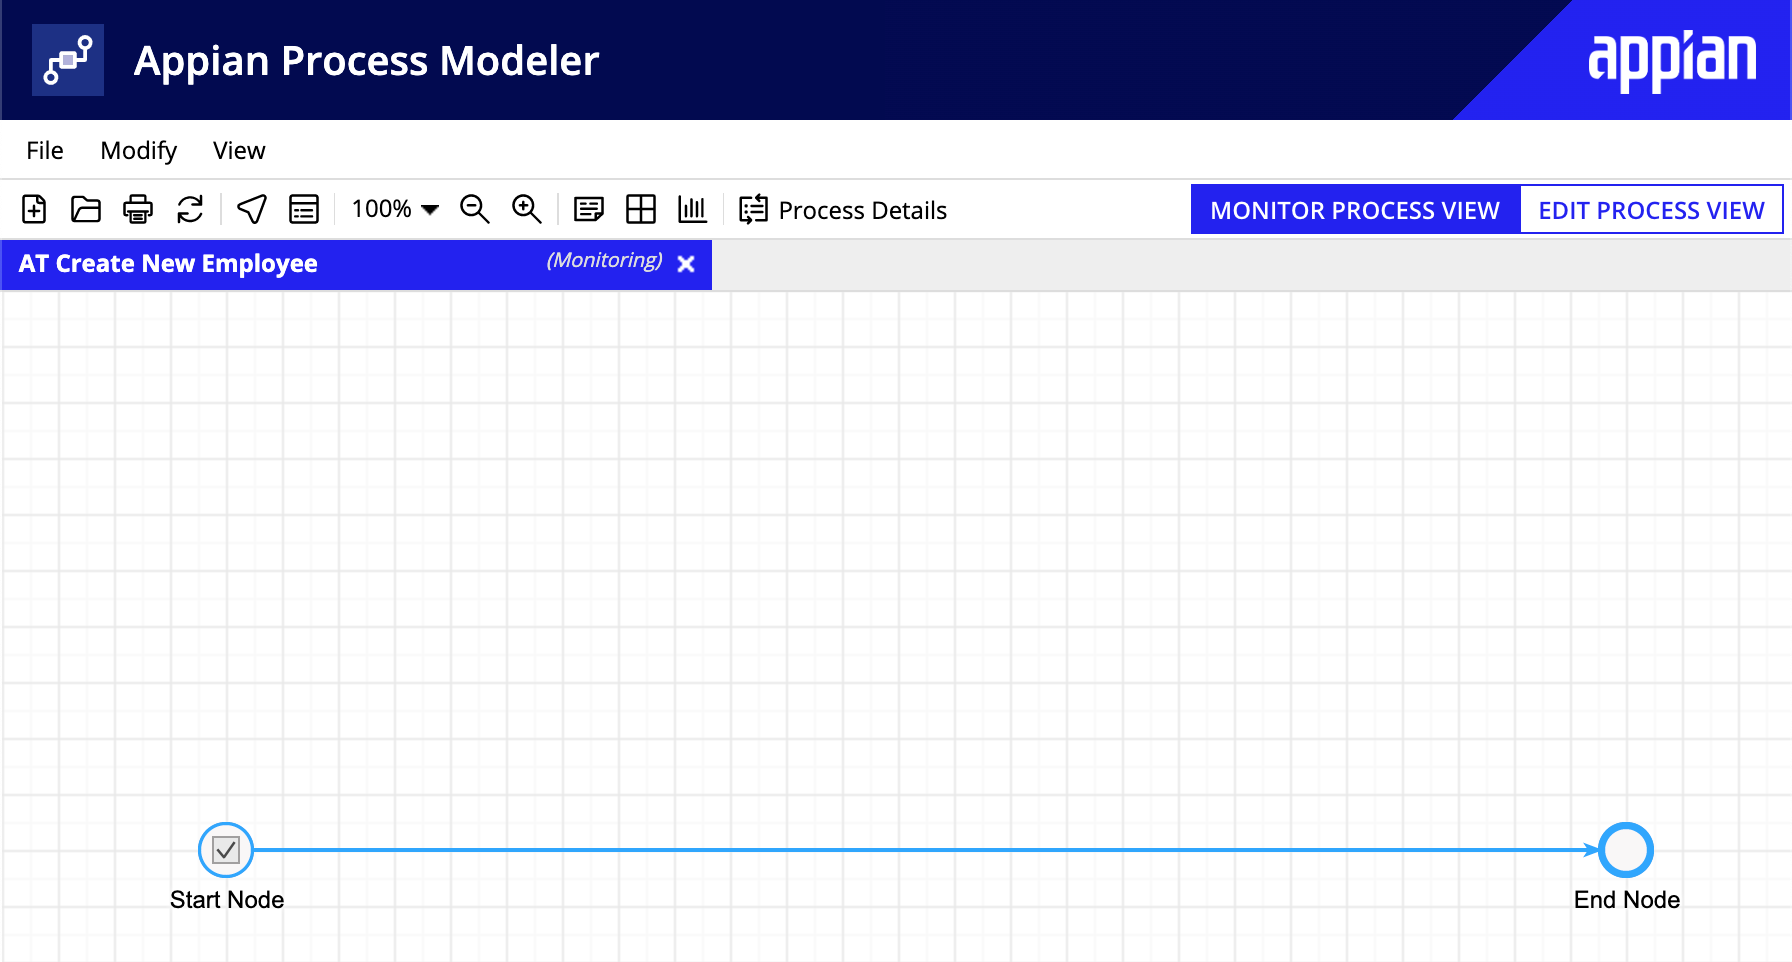 Process Monitor view showing Create New Employee flow